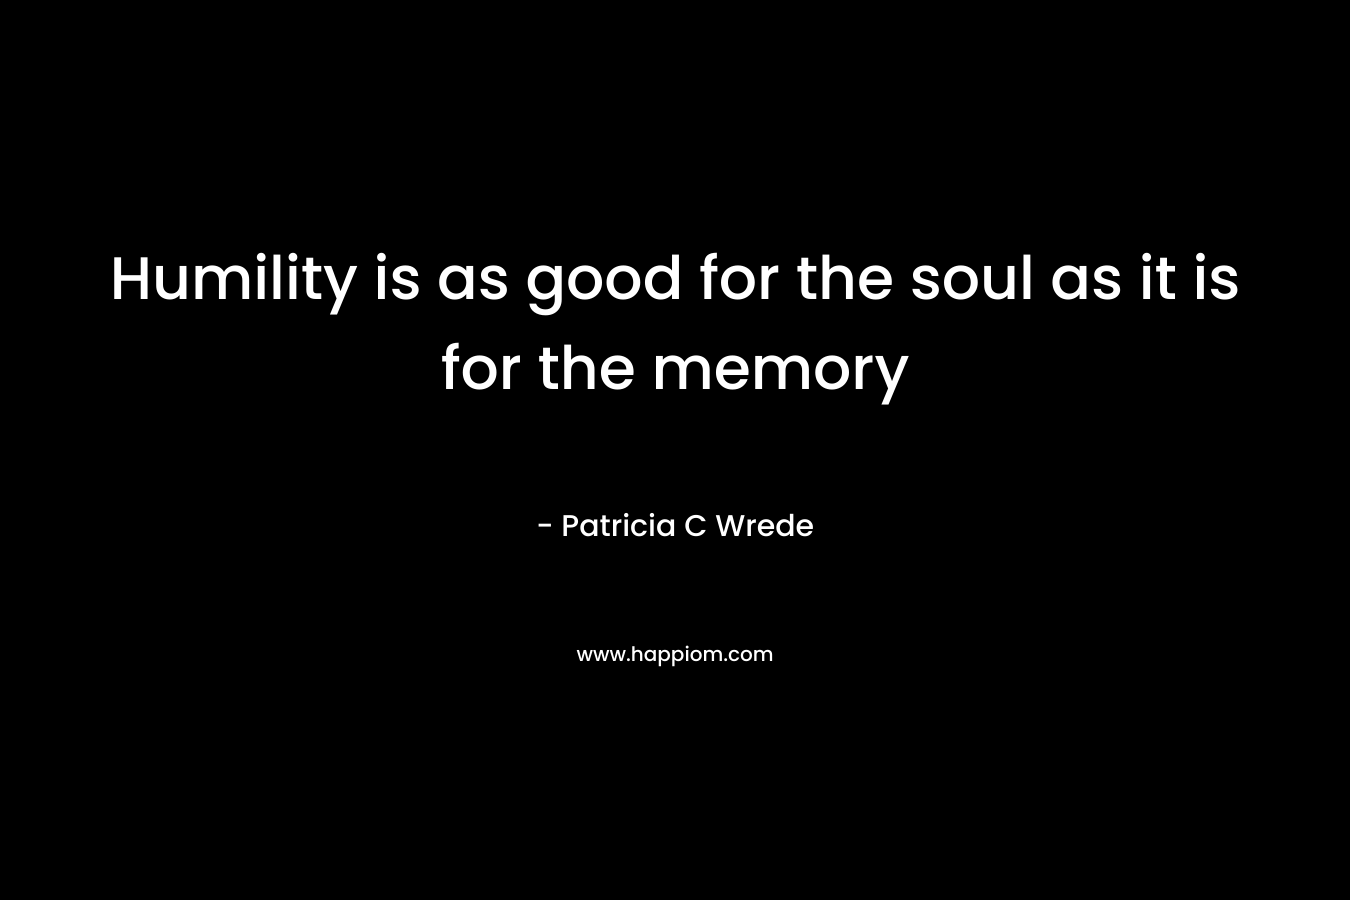 Humility is as good for the soul as it is for the memory